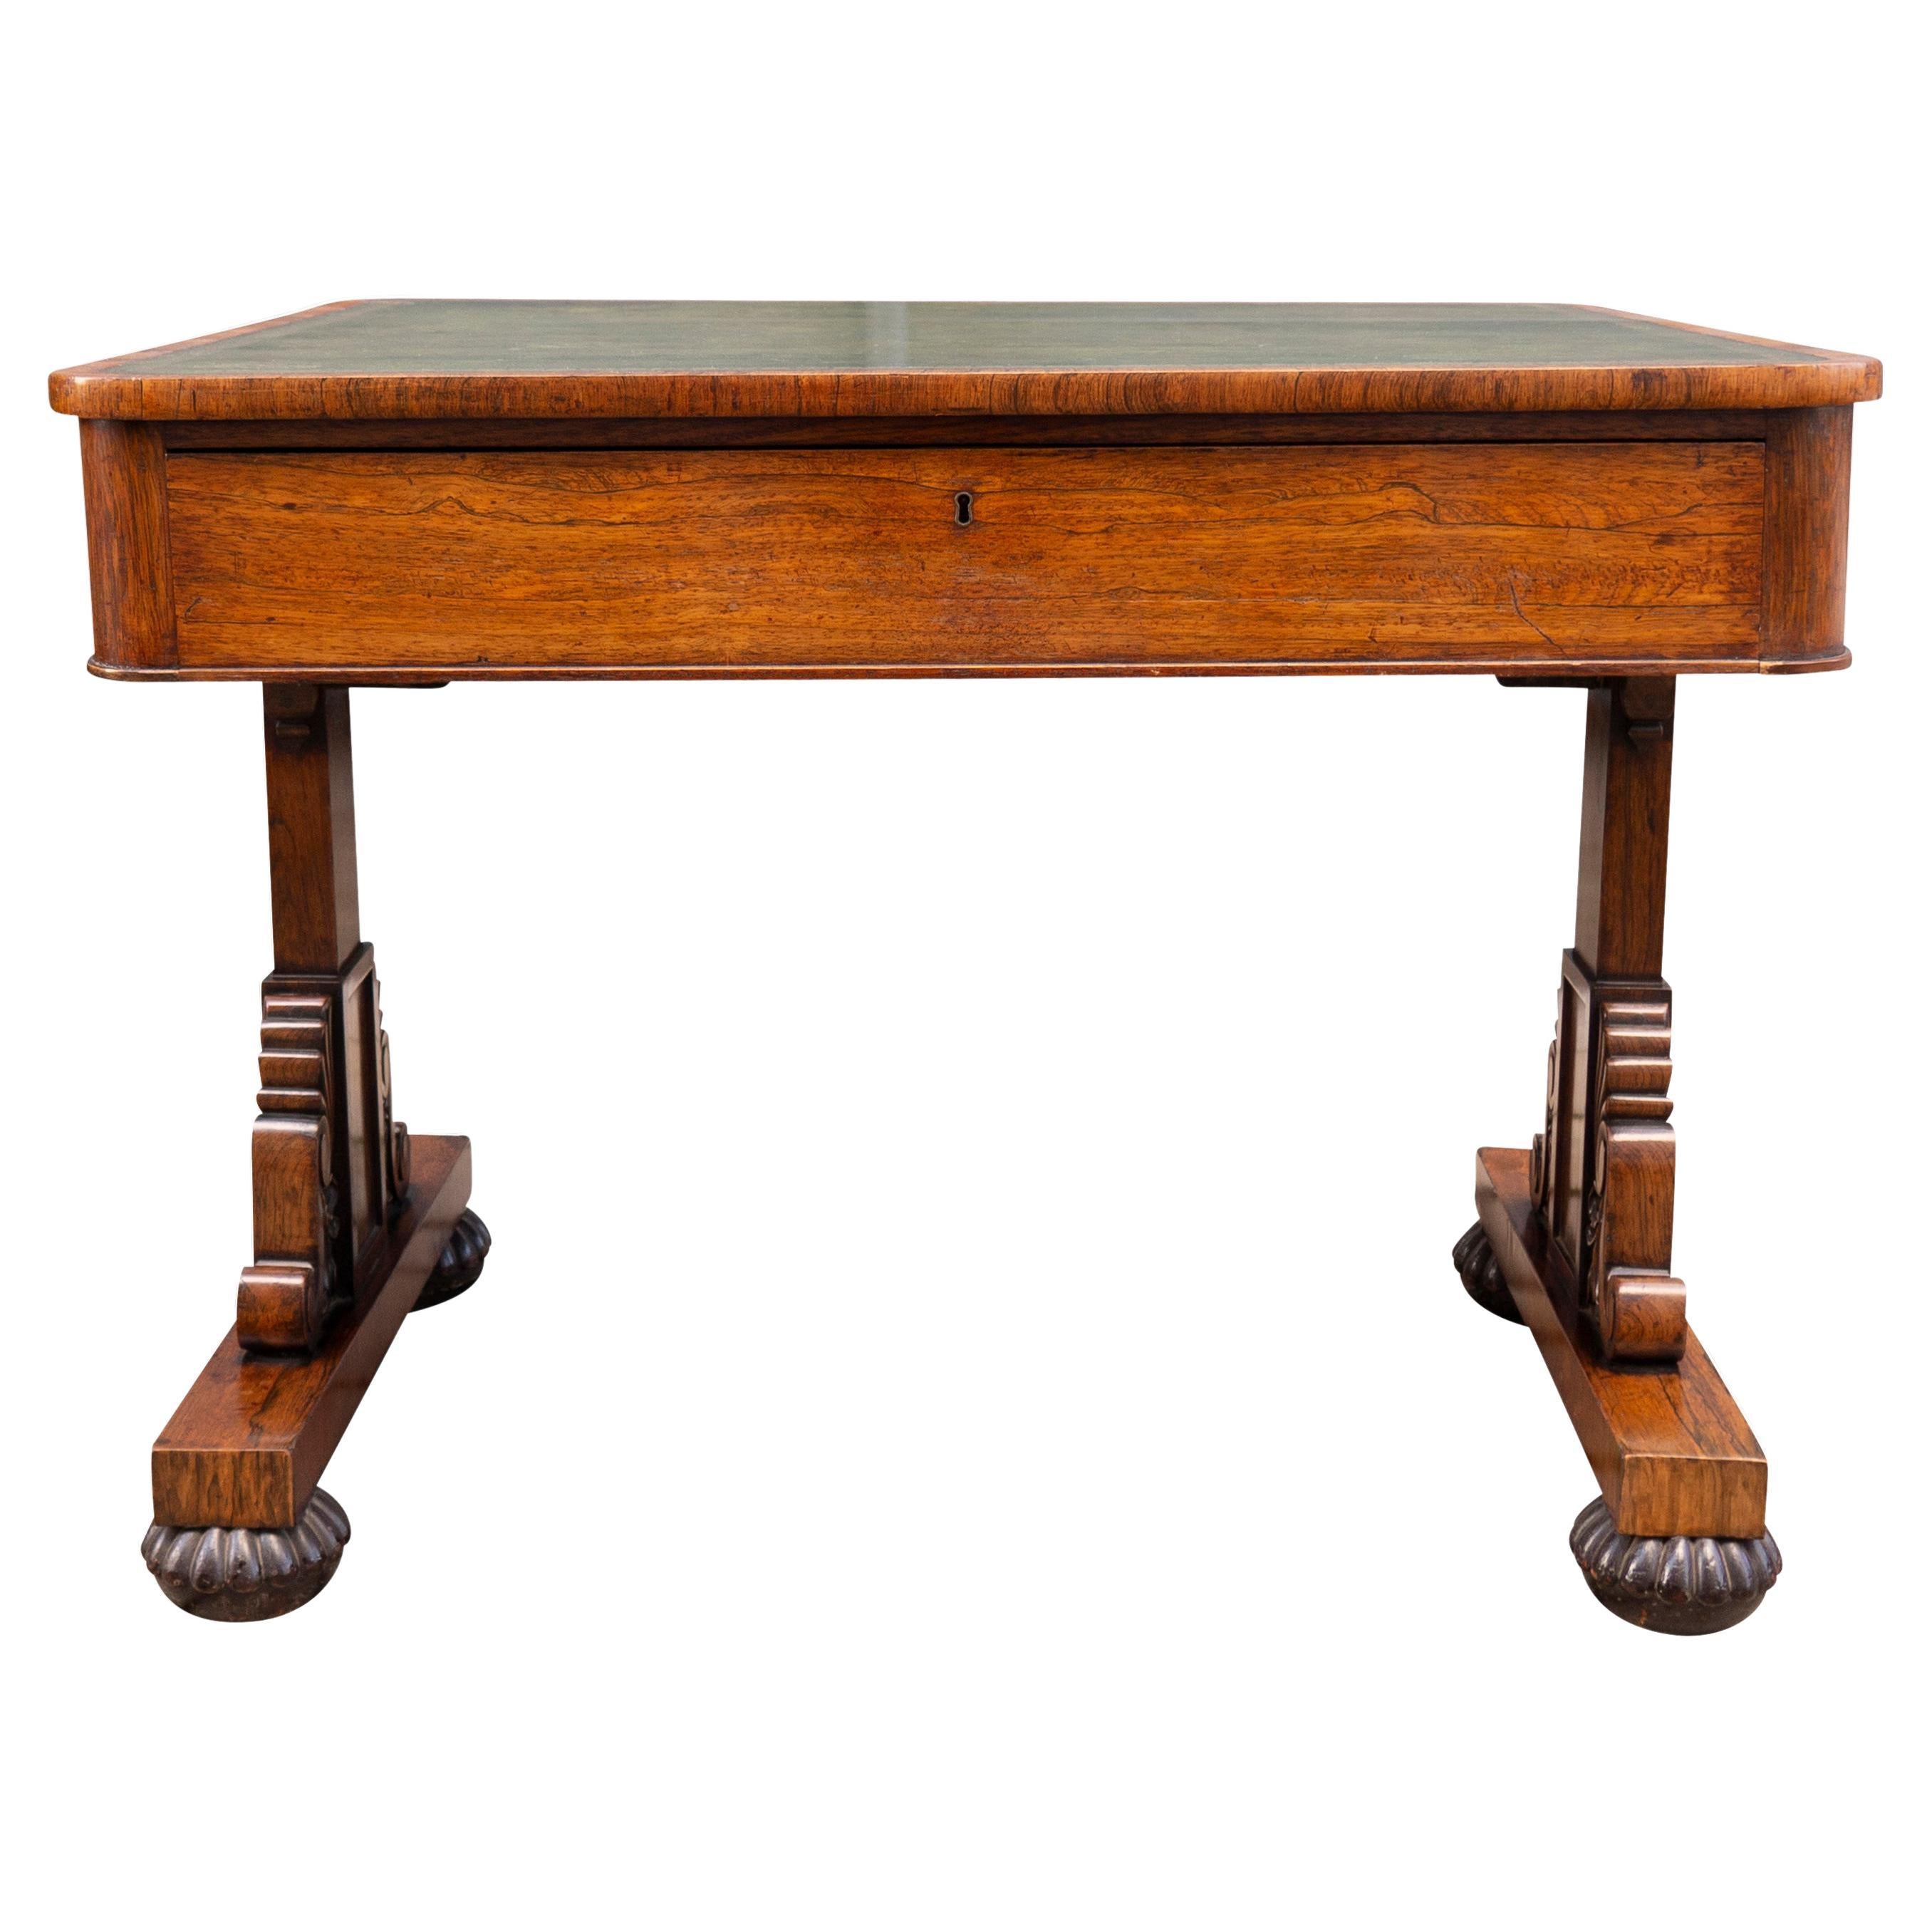 Signed Wilkinson , Ludgate Hill. With a squarish top with a nice green tooled leather , single long drawer,. trestle base with nice carved details , flattened bun feet and casters. Wilkinson was a noted highly regarded maker and received notable